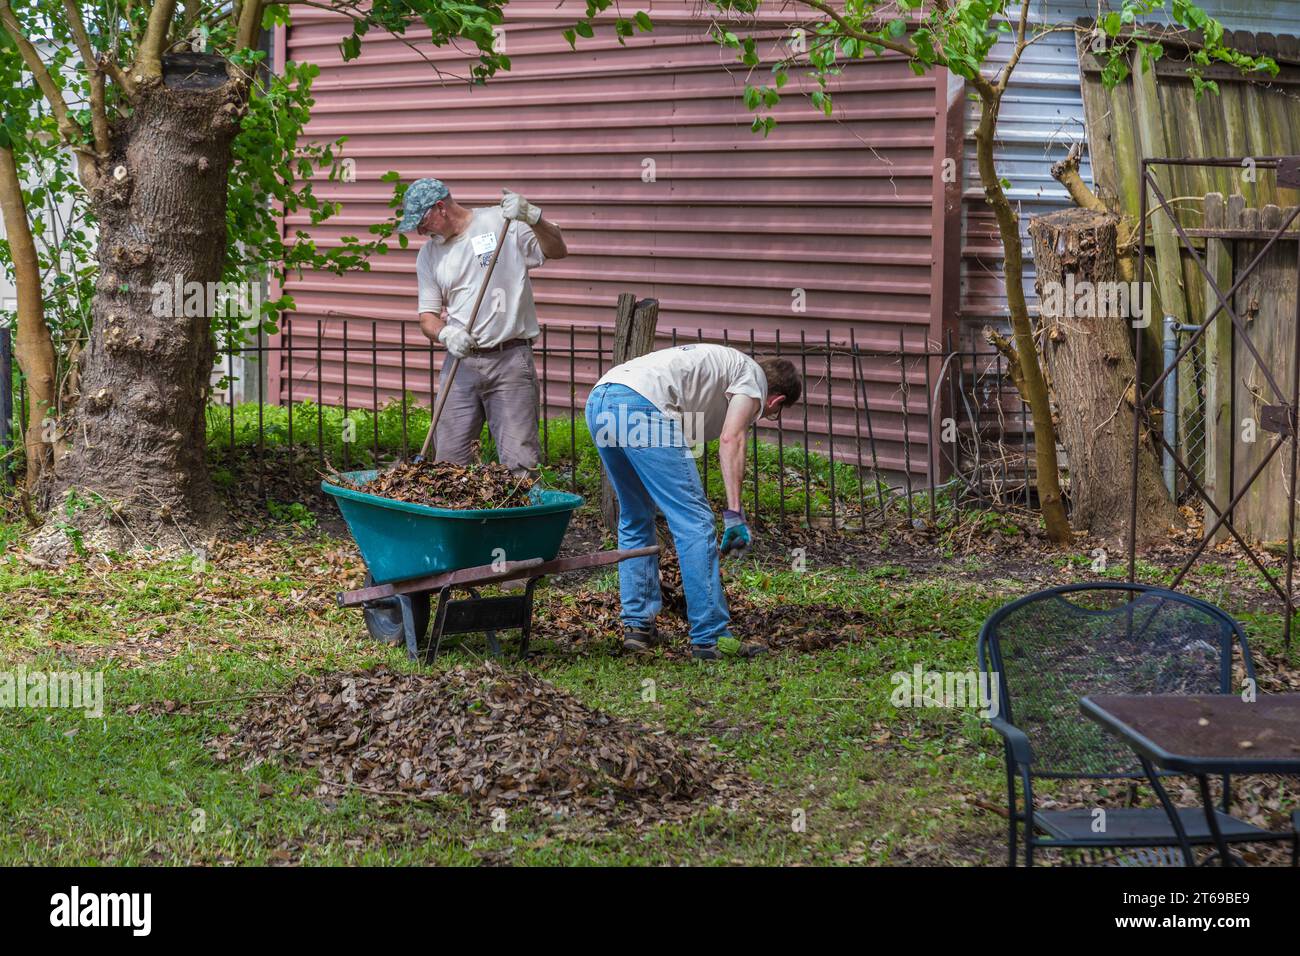 Members of 8 Days of Hope faith based charity volunteer team cleaning up the yard of a home that was flooded in Houston, Texas Stock Photo